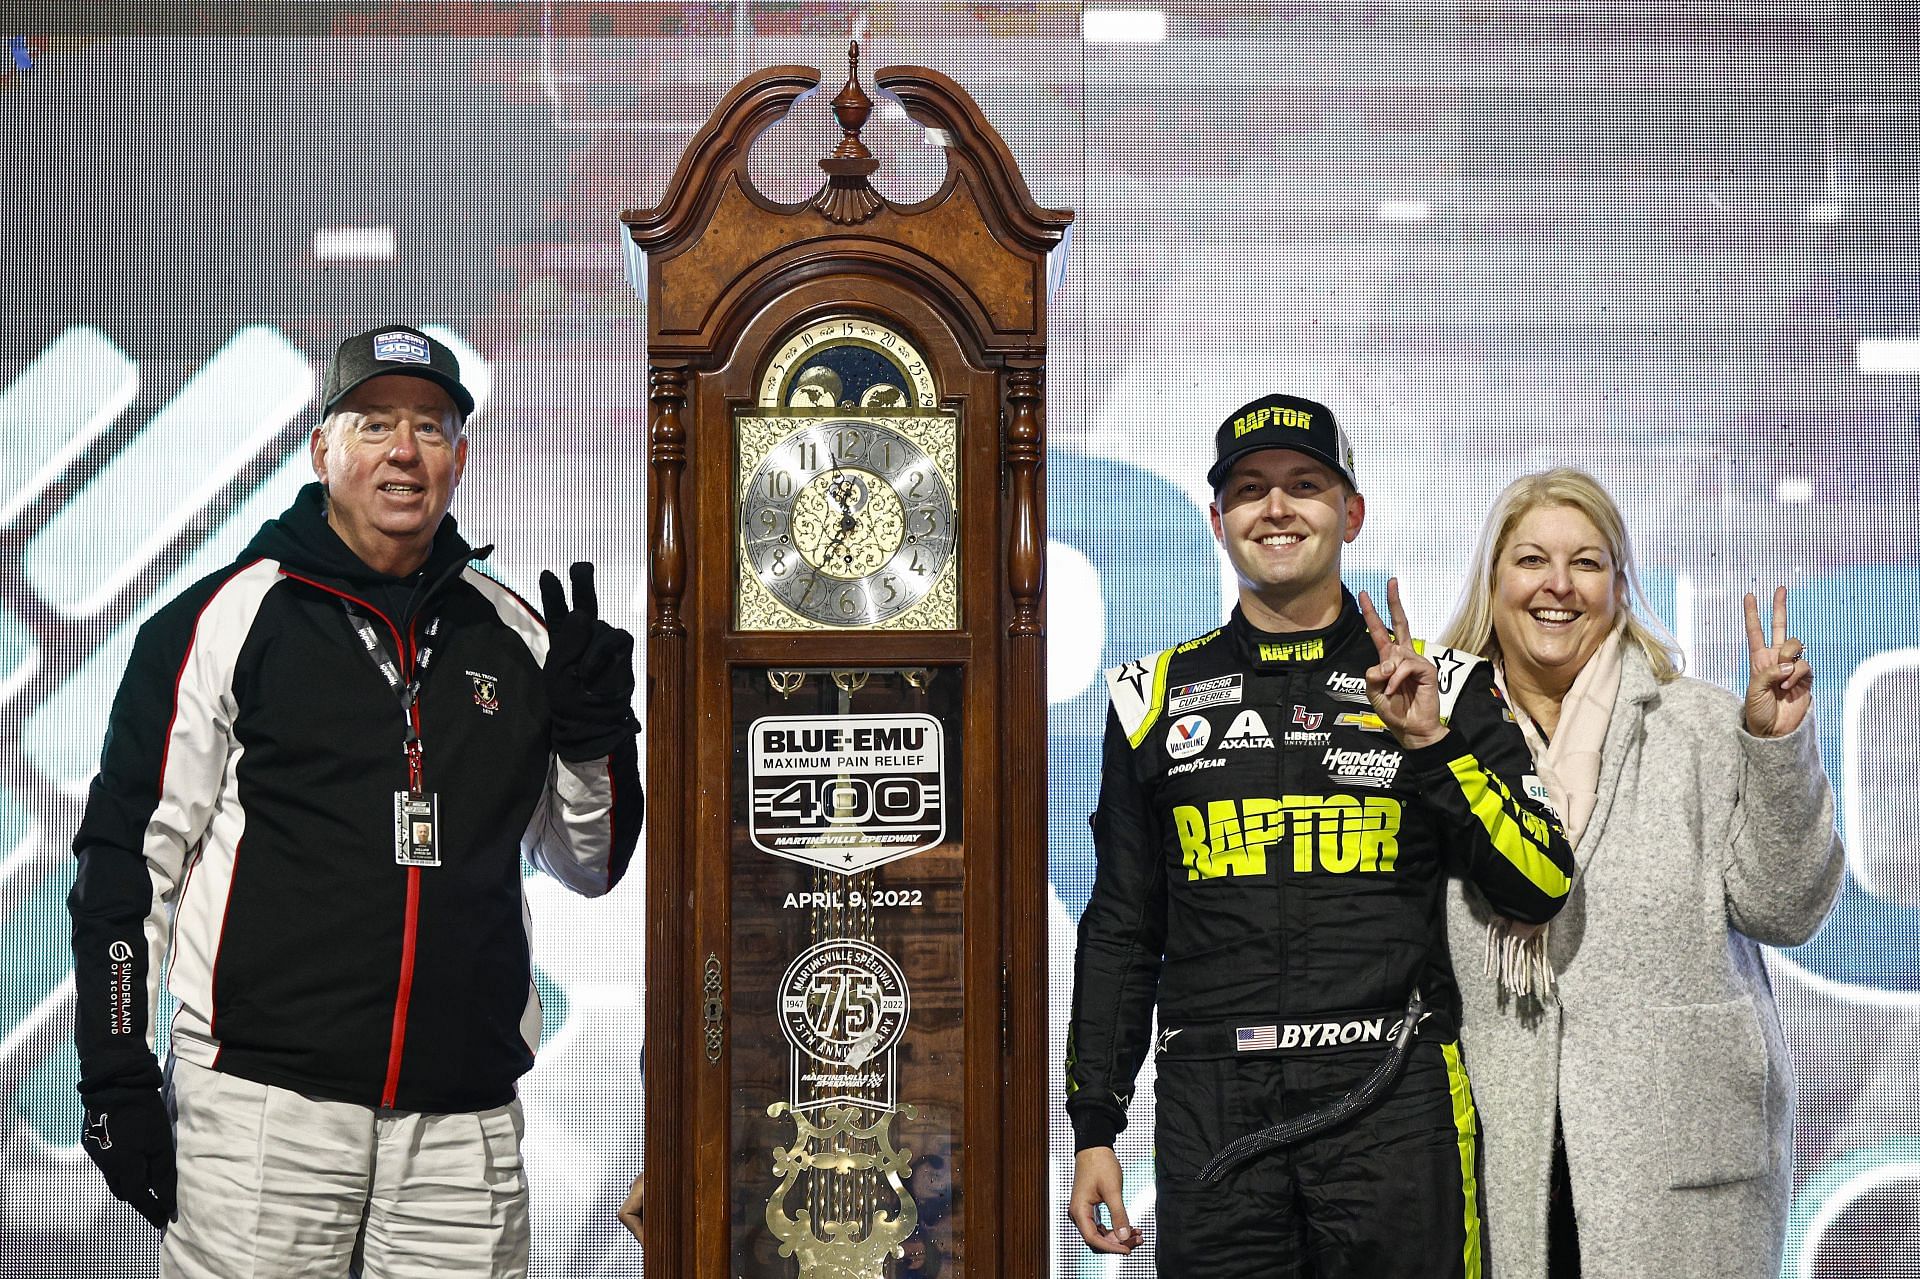 William Byron celebrates winning the 2022 NASCAR Cup Series Blue-Emu Maximum Pain Relief 400 with his parents at Martinsville Speedway in Virginia. (Photo by Jared C. Tilton/Getty Images)